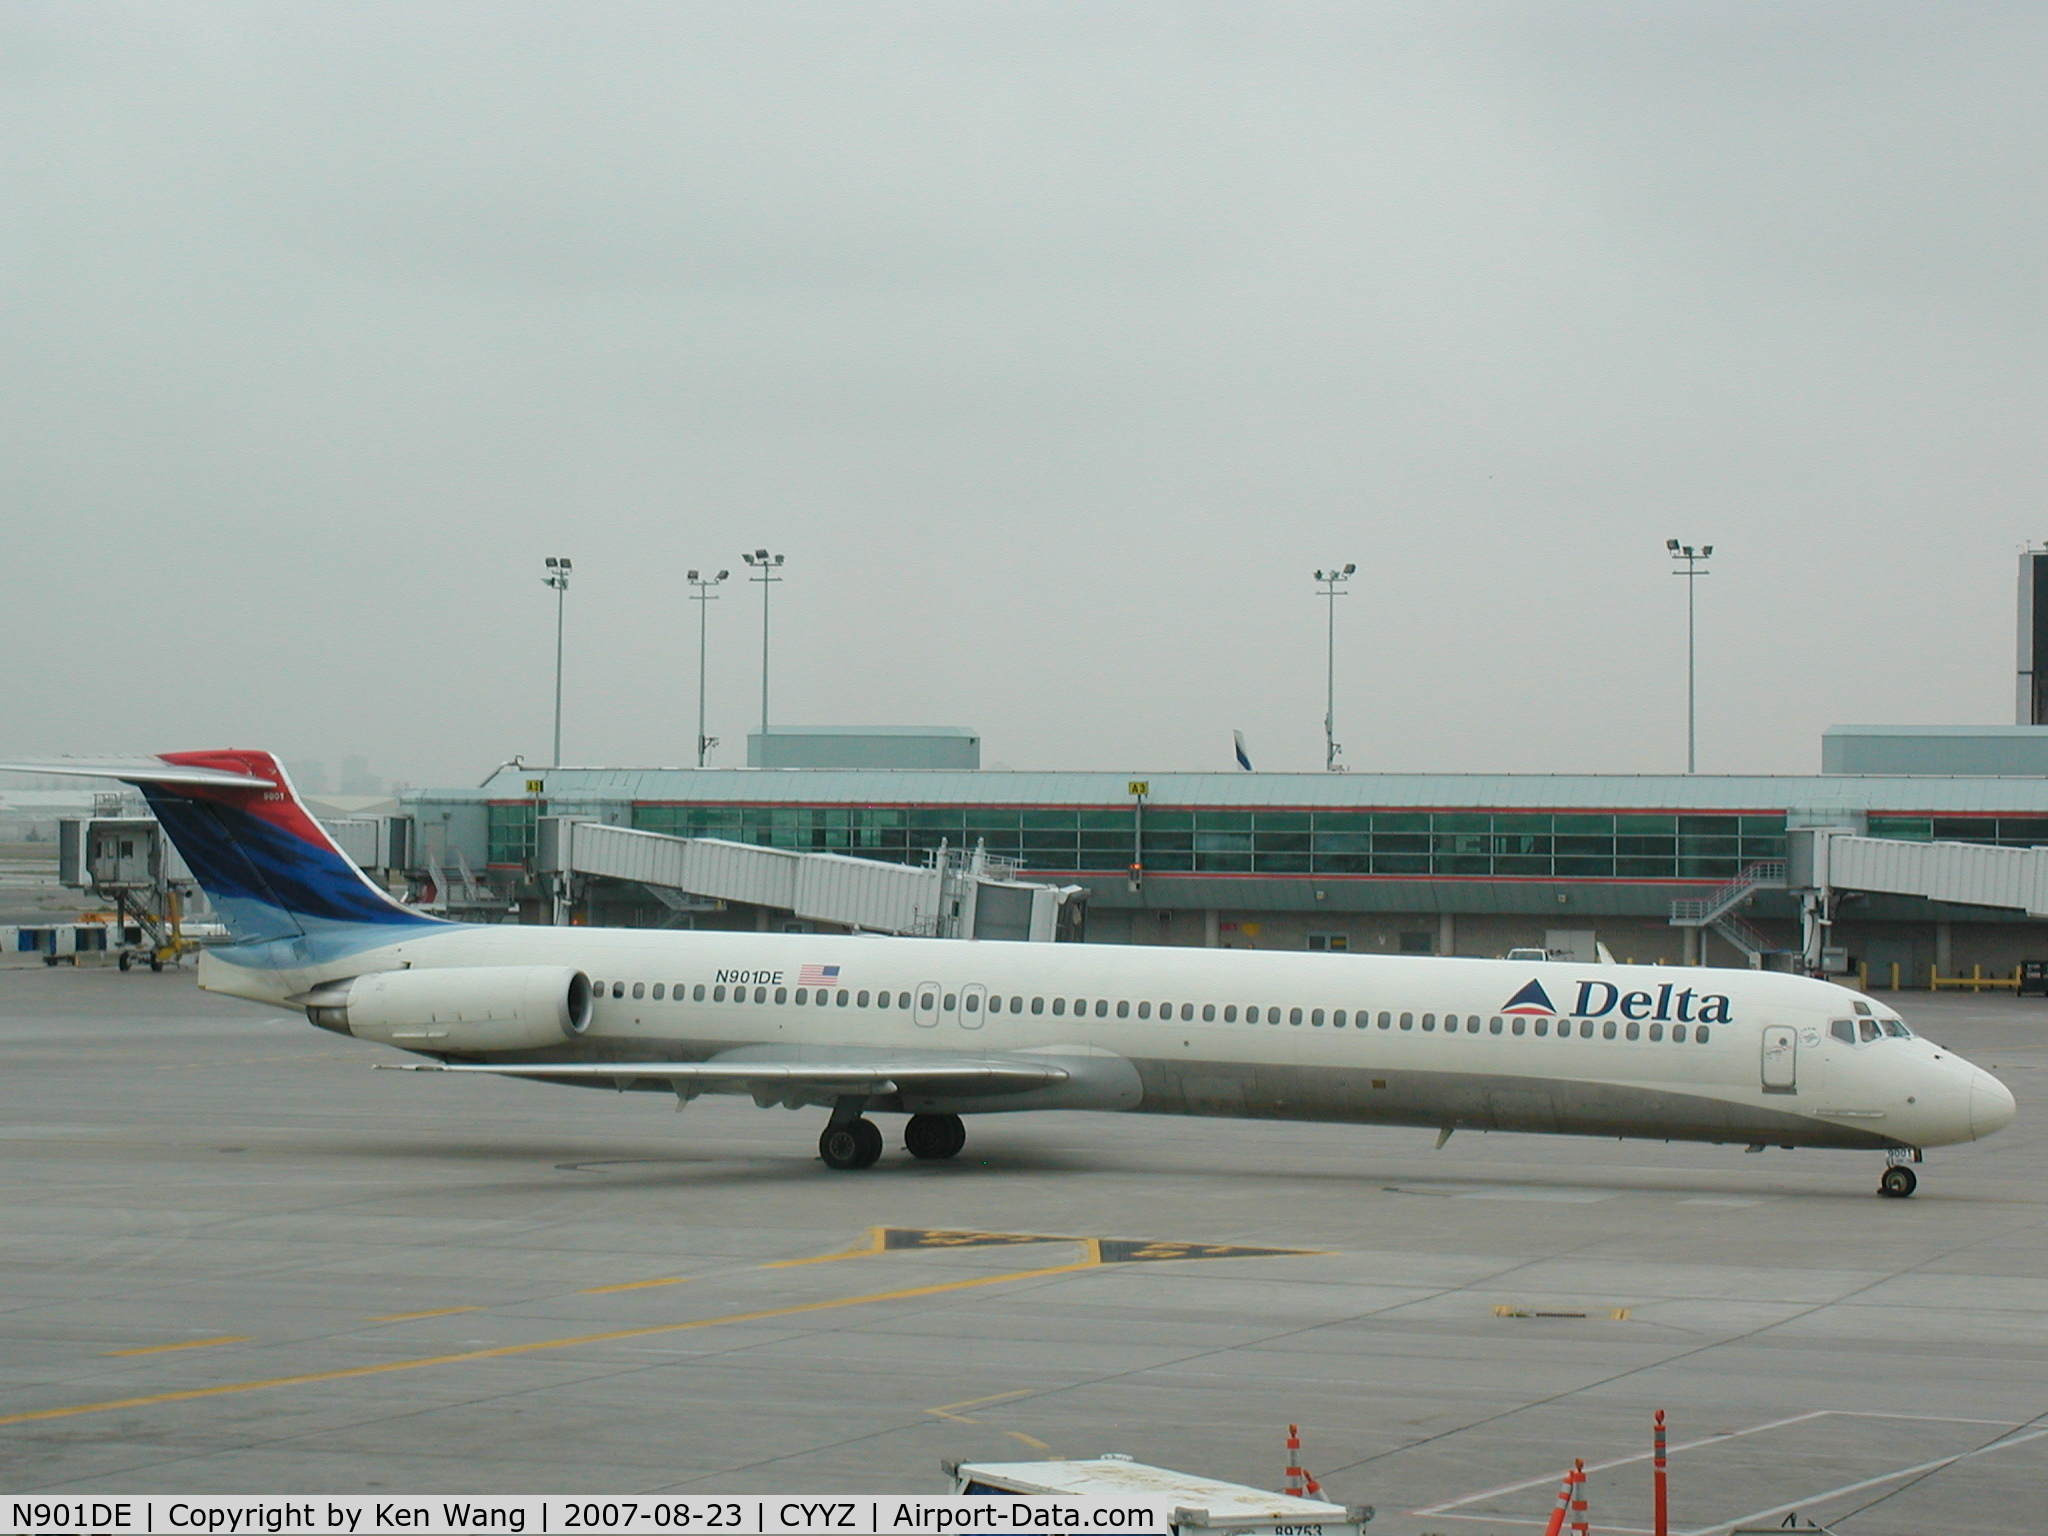 N901DE, 1992 McDonnell Douglas MD-88 C/N 53378, Delta airlines MD-88 just arrived at Toronto Pearson Airport